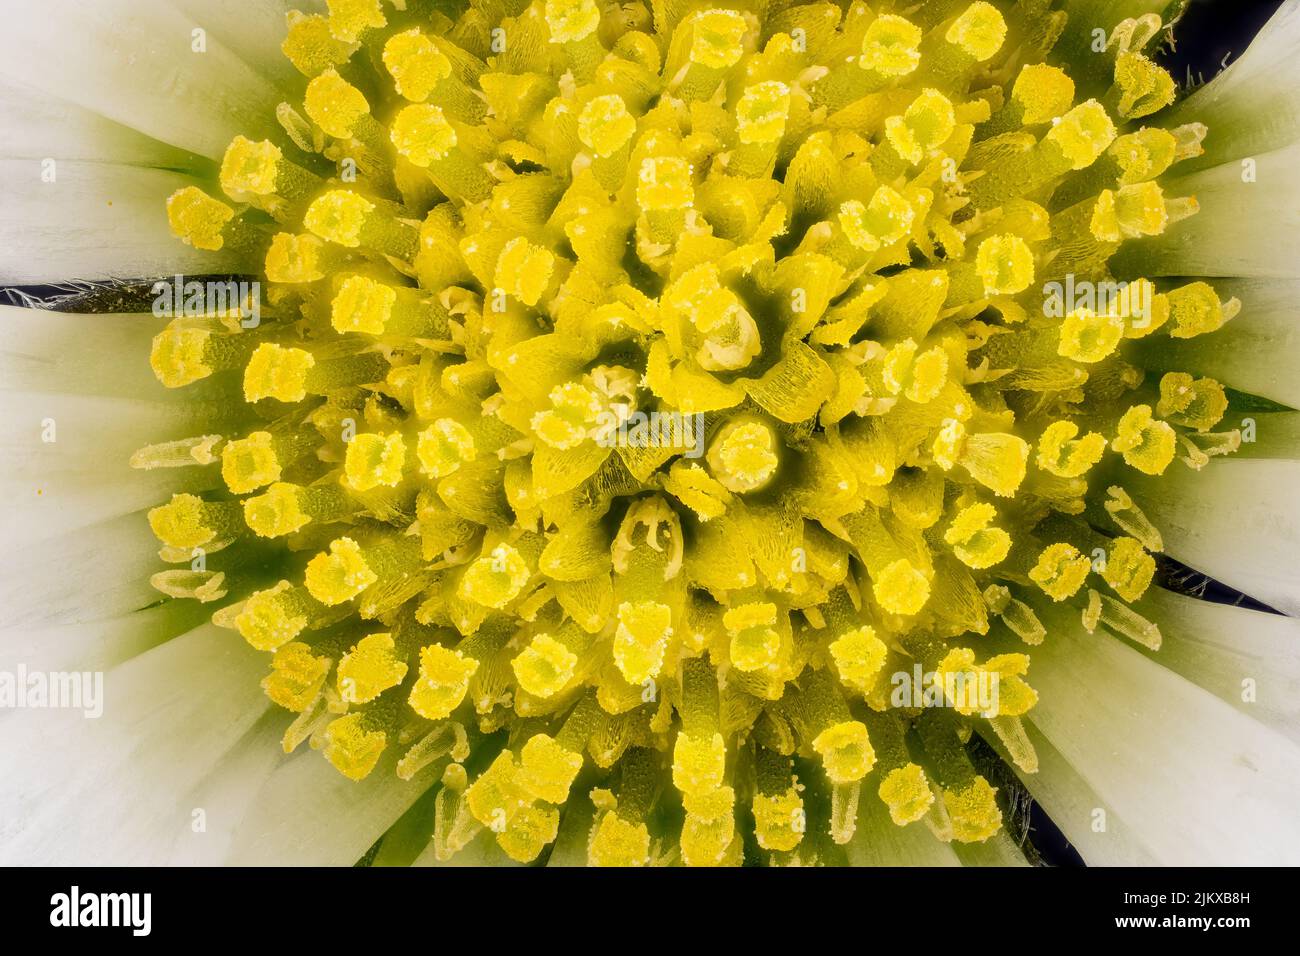 Tiny daisy flower under microscope yellow stamen visible, image width 9mm Stock Photo